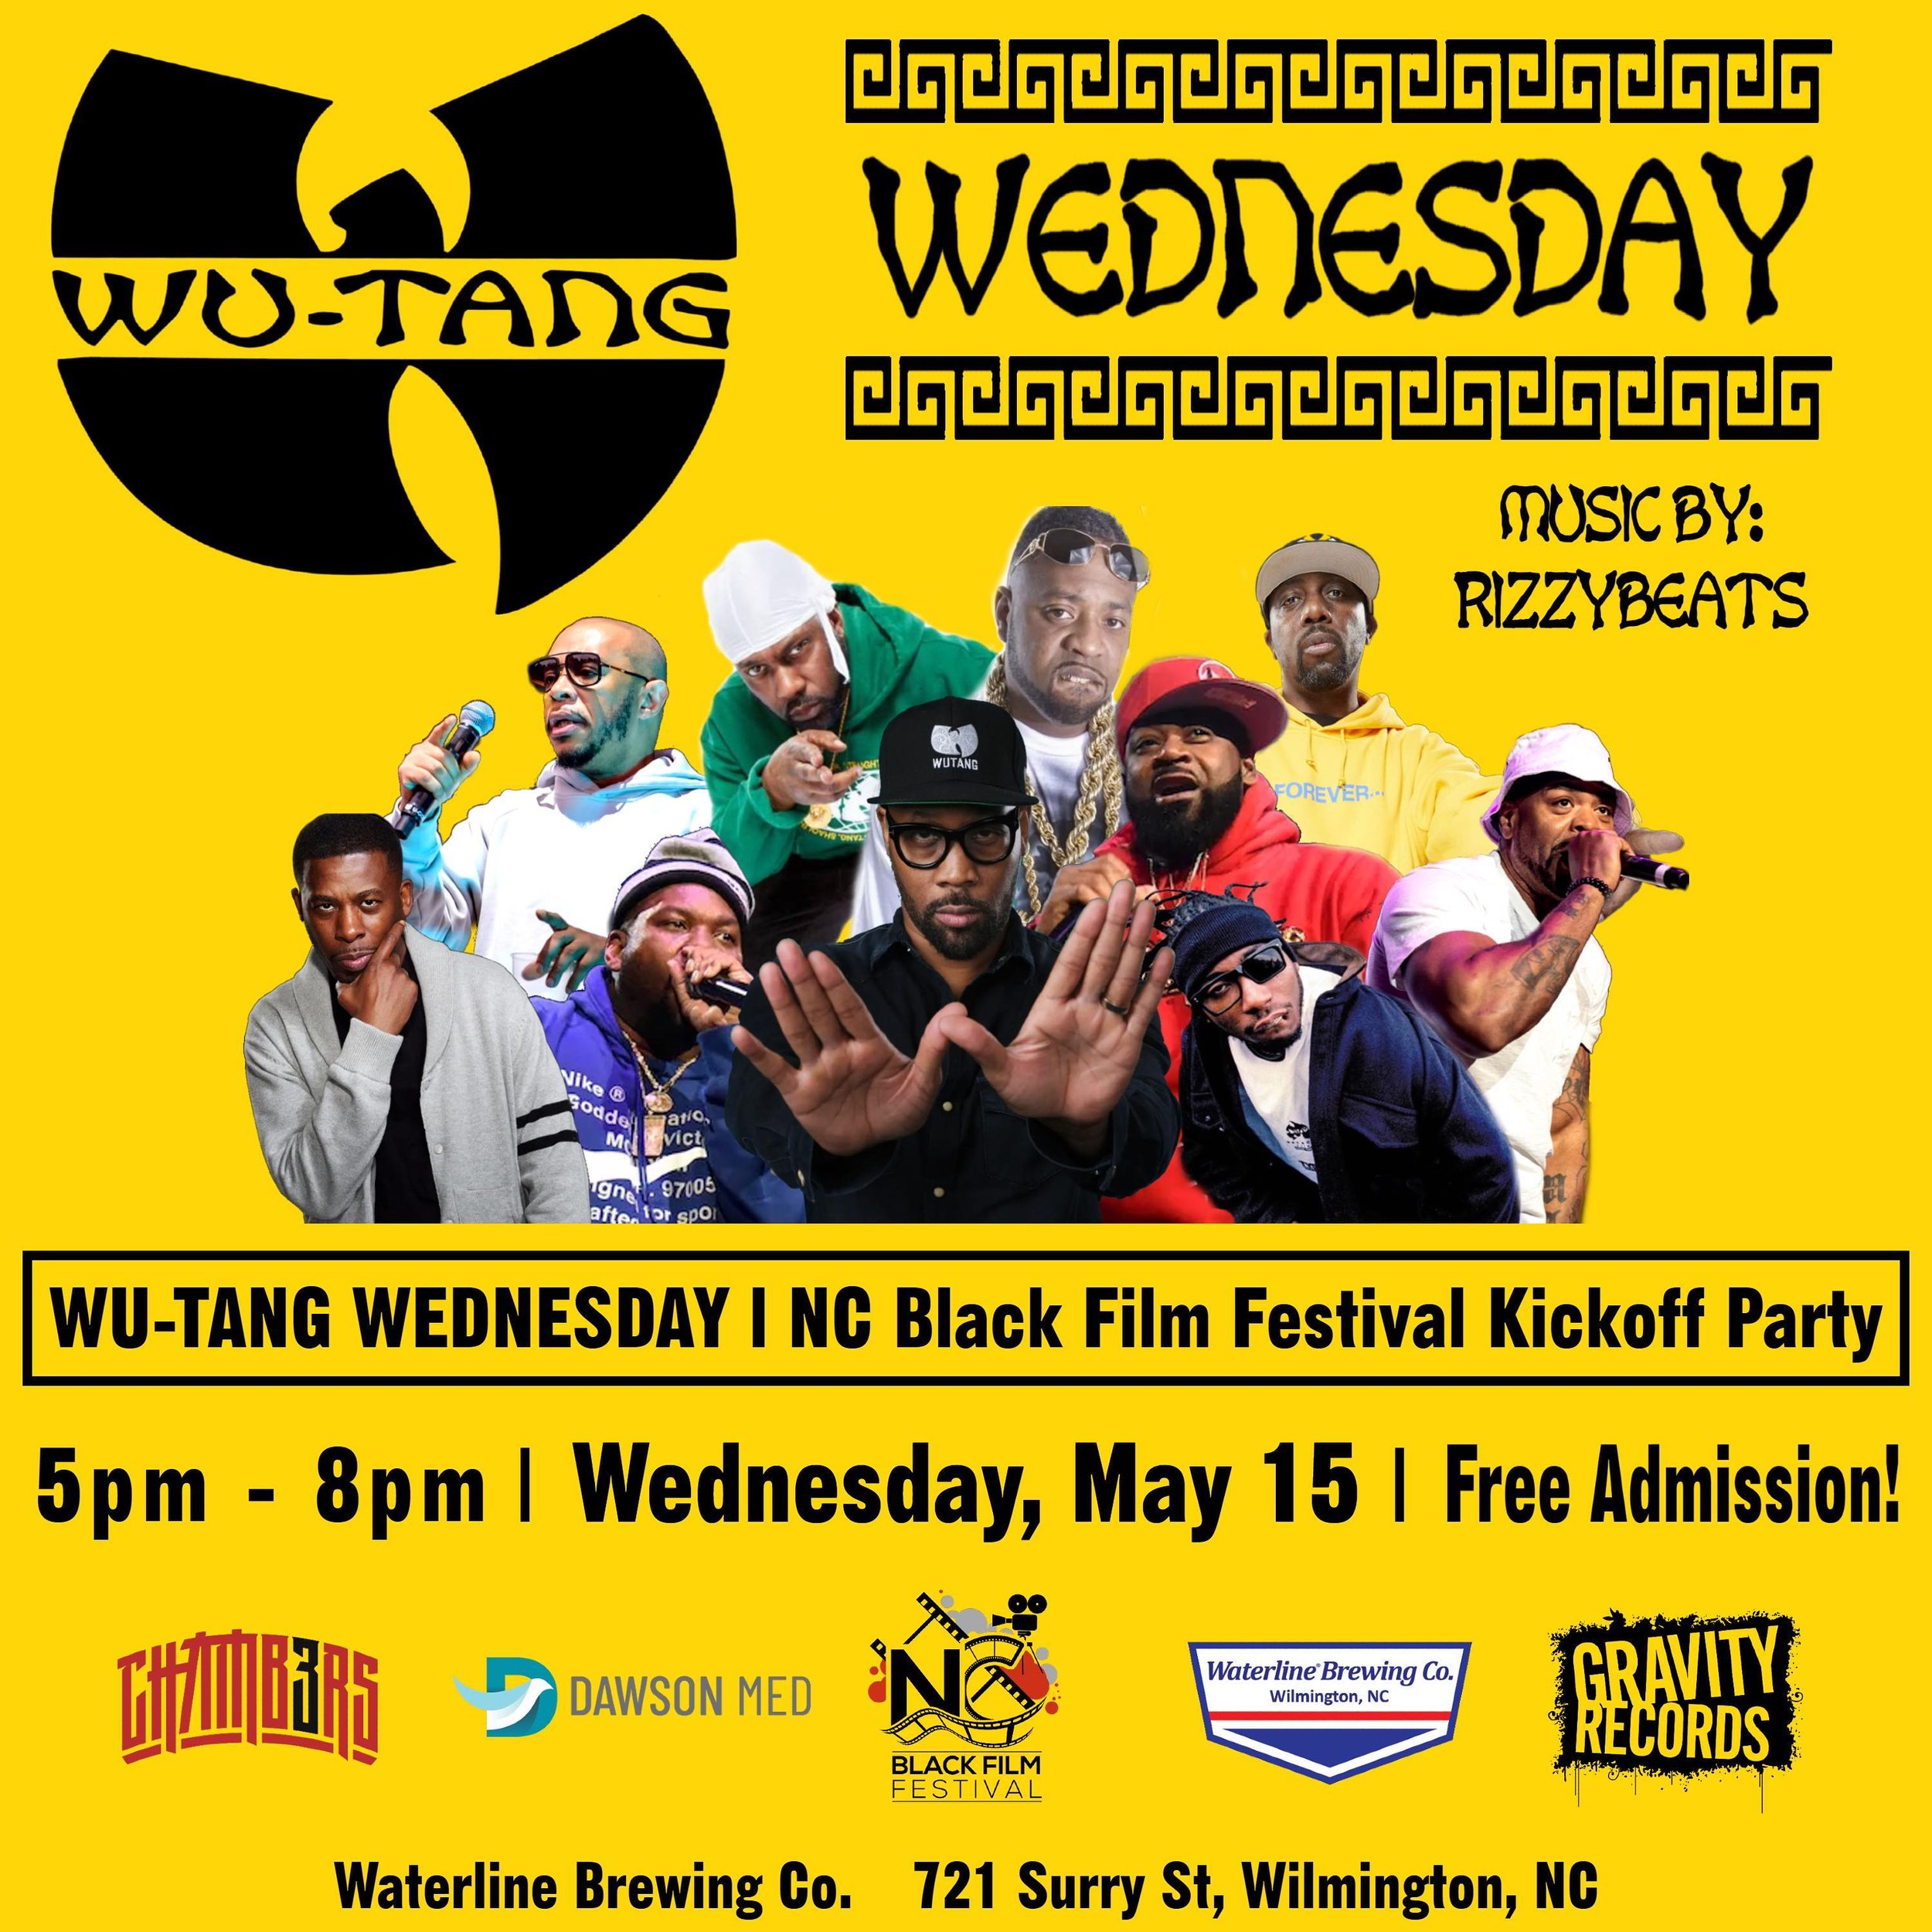 It&rsquo;s #WuTangWednesday so that means that we are 1 week away from the Wu-Tang Wednesday | NC Black Film Festival Kickoff Party at @waterlinebeers.🍻🎶

Music by @rizzydohboss 
Food Truck @wheelzpizza 
Giveaways from @3chambersfest @gravityrecord